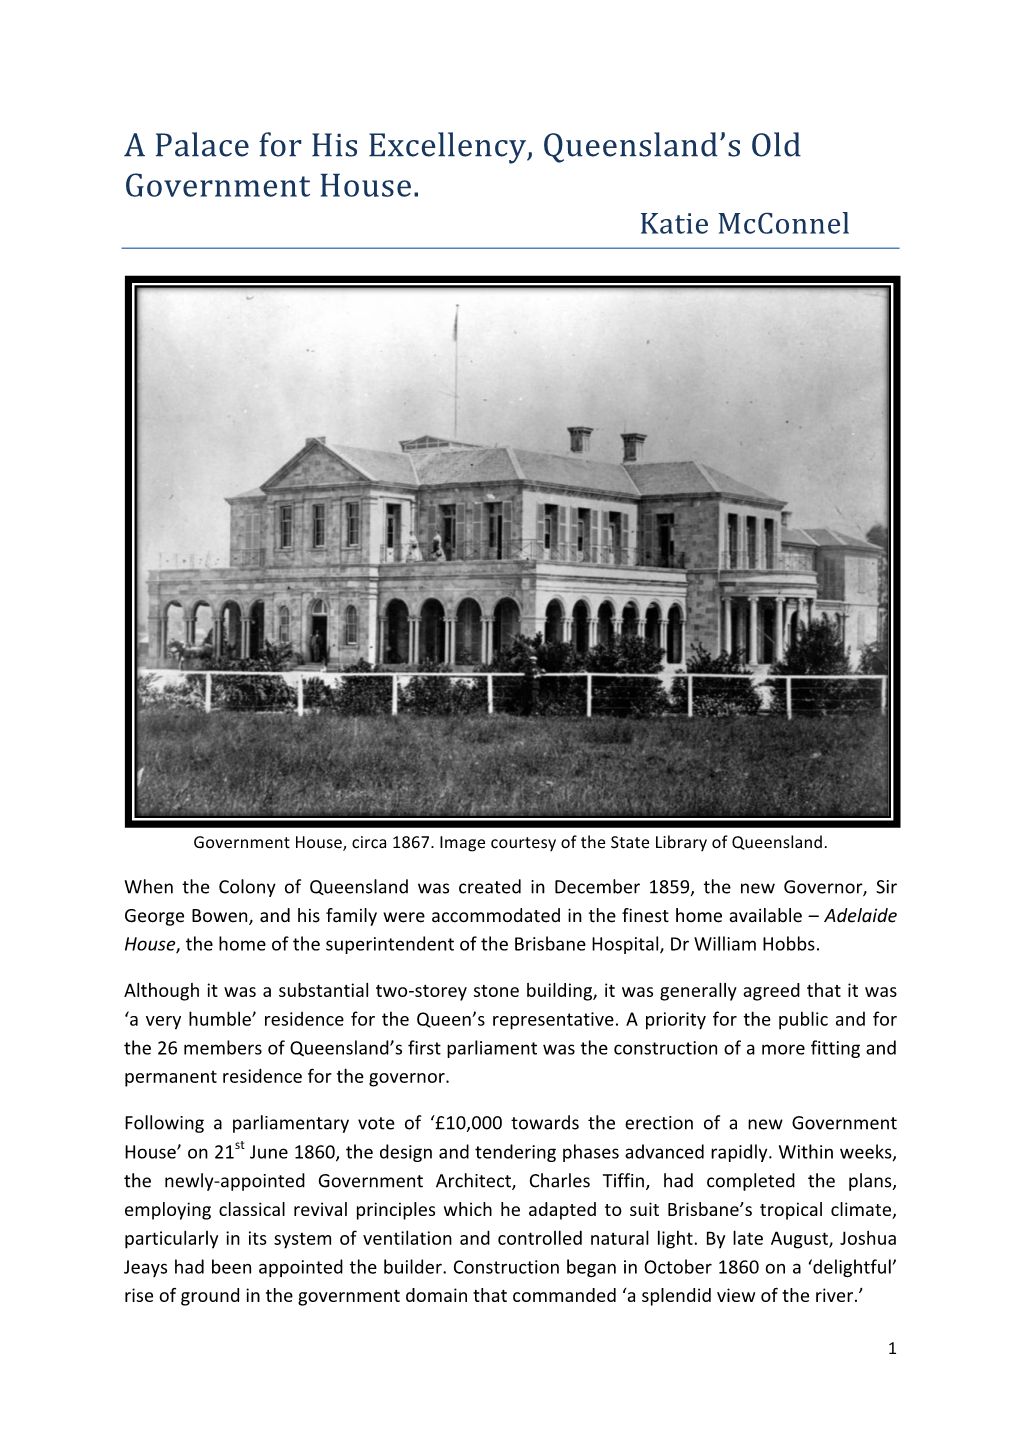 A Palace for His Excellency, Queensland's Government House